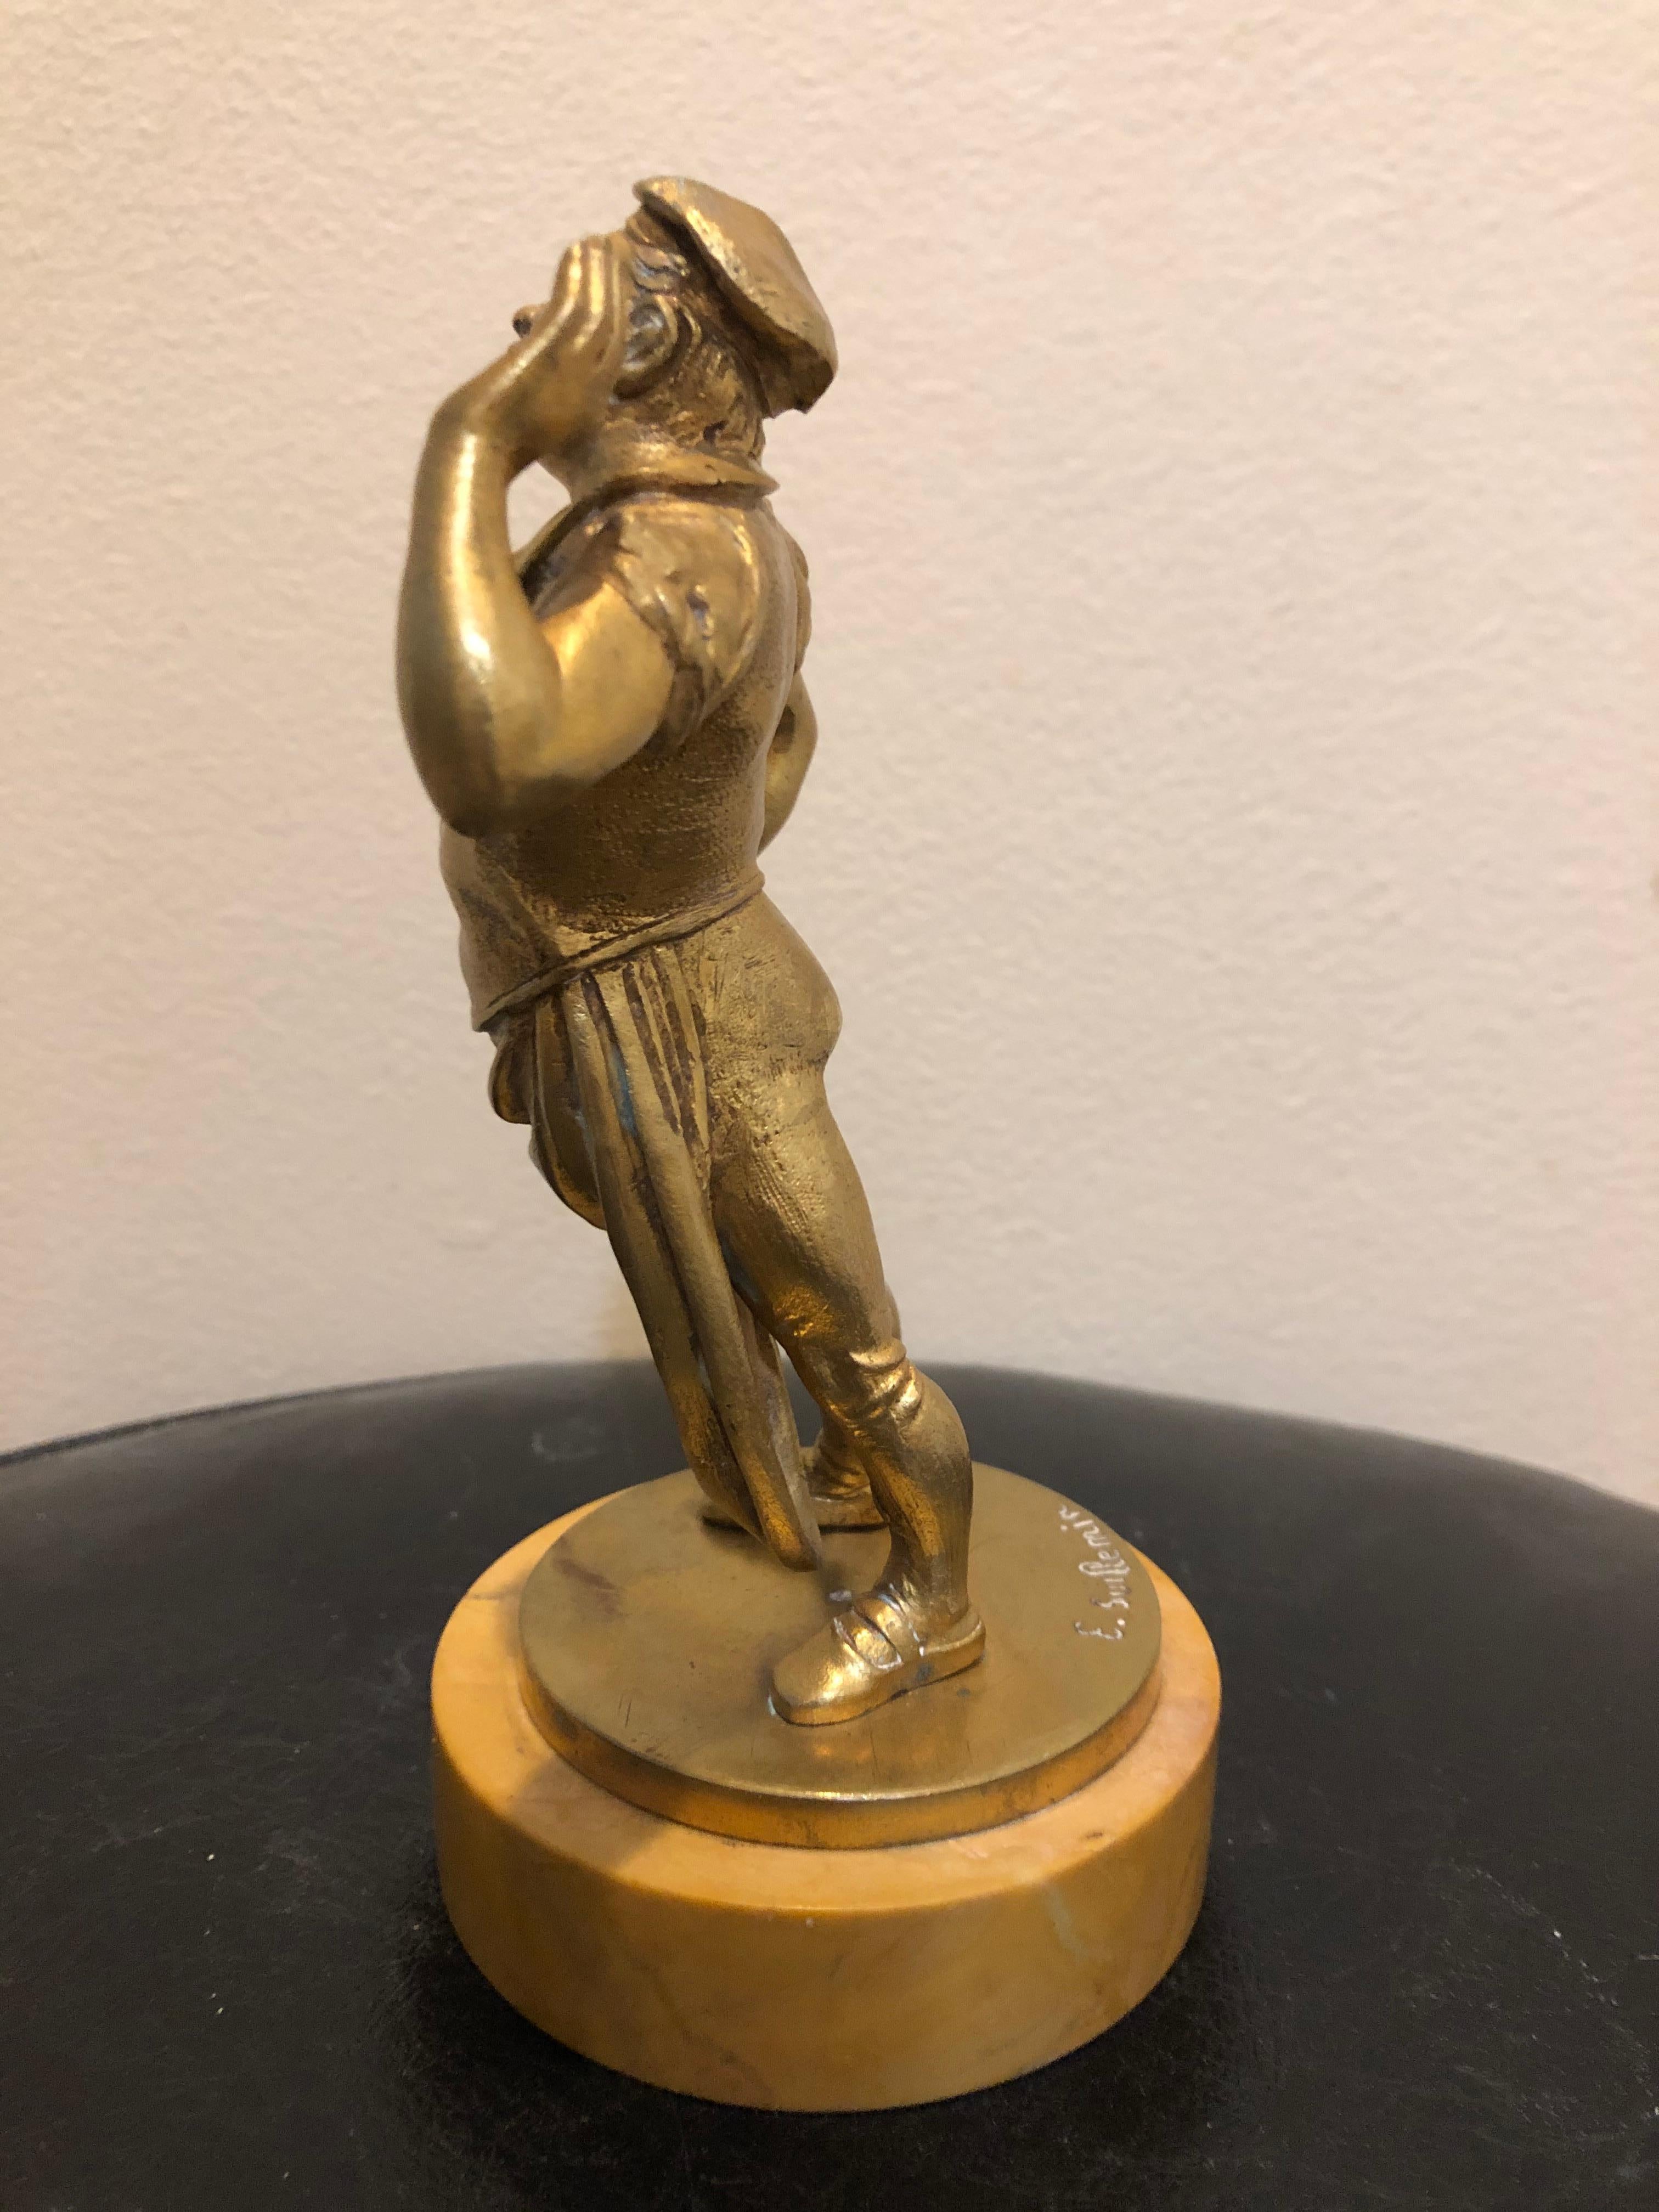 Emile Guillemin: 1841-1907. Very important and well listed French sculptor. He has auction results over 1.2 million dollars. This little bronze gem of a possible cook or some other character is quite detailed. It measures 6 1/2 inches high by 3 1/4